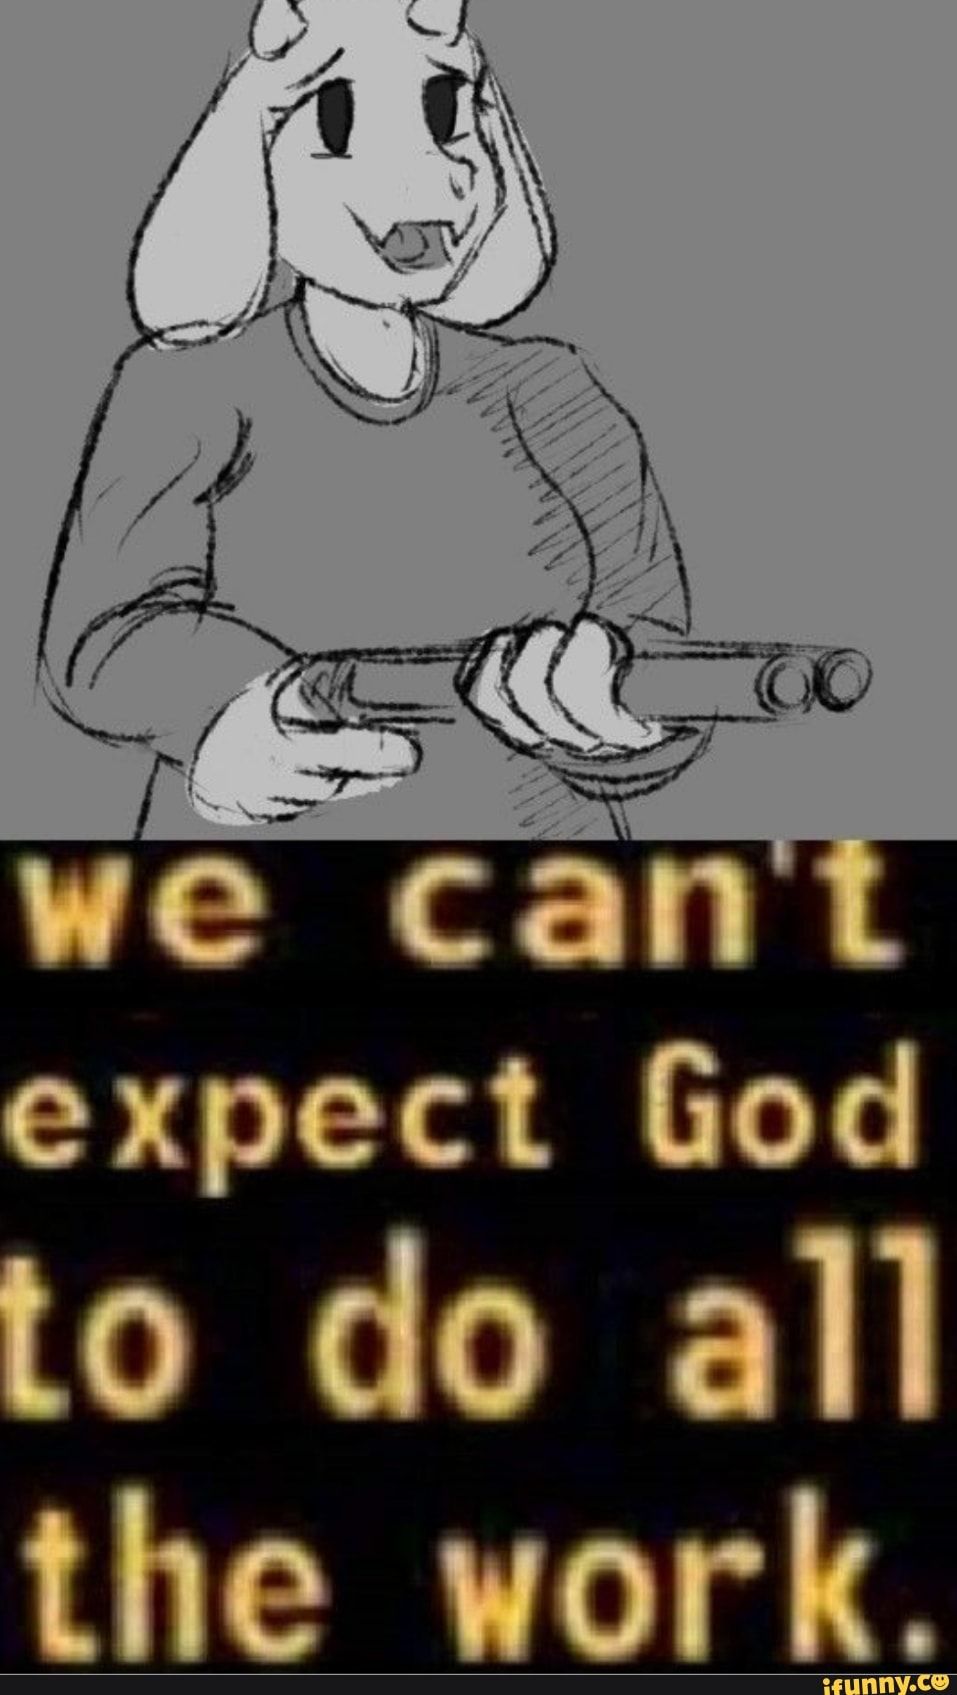 High Quality we can't expect god to do all the work toriel version Blank Meme Template